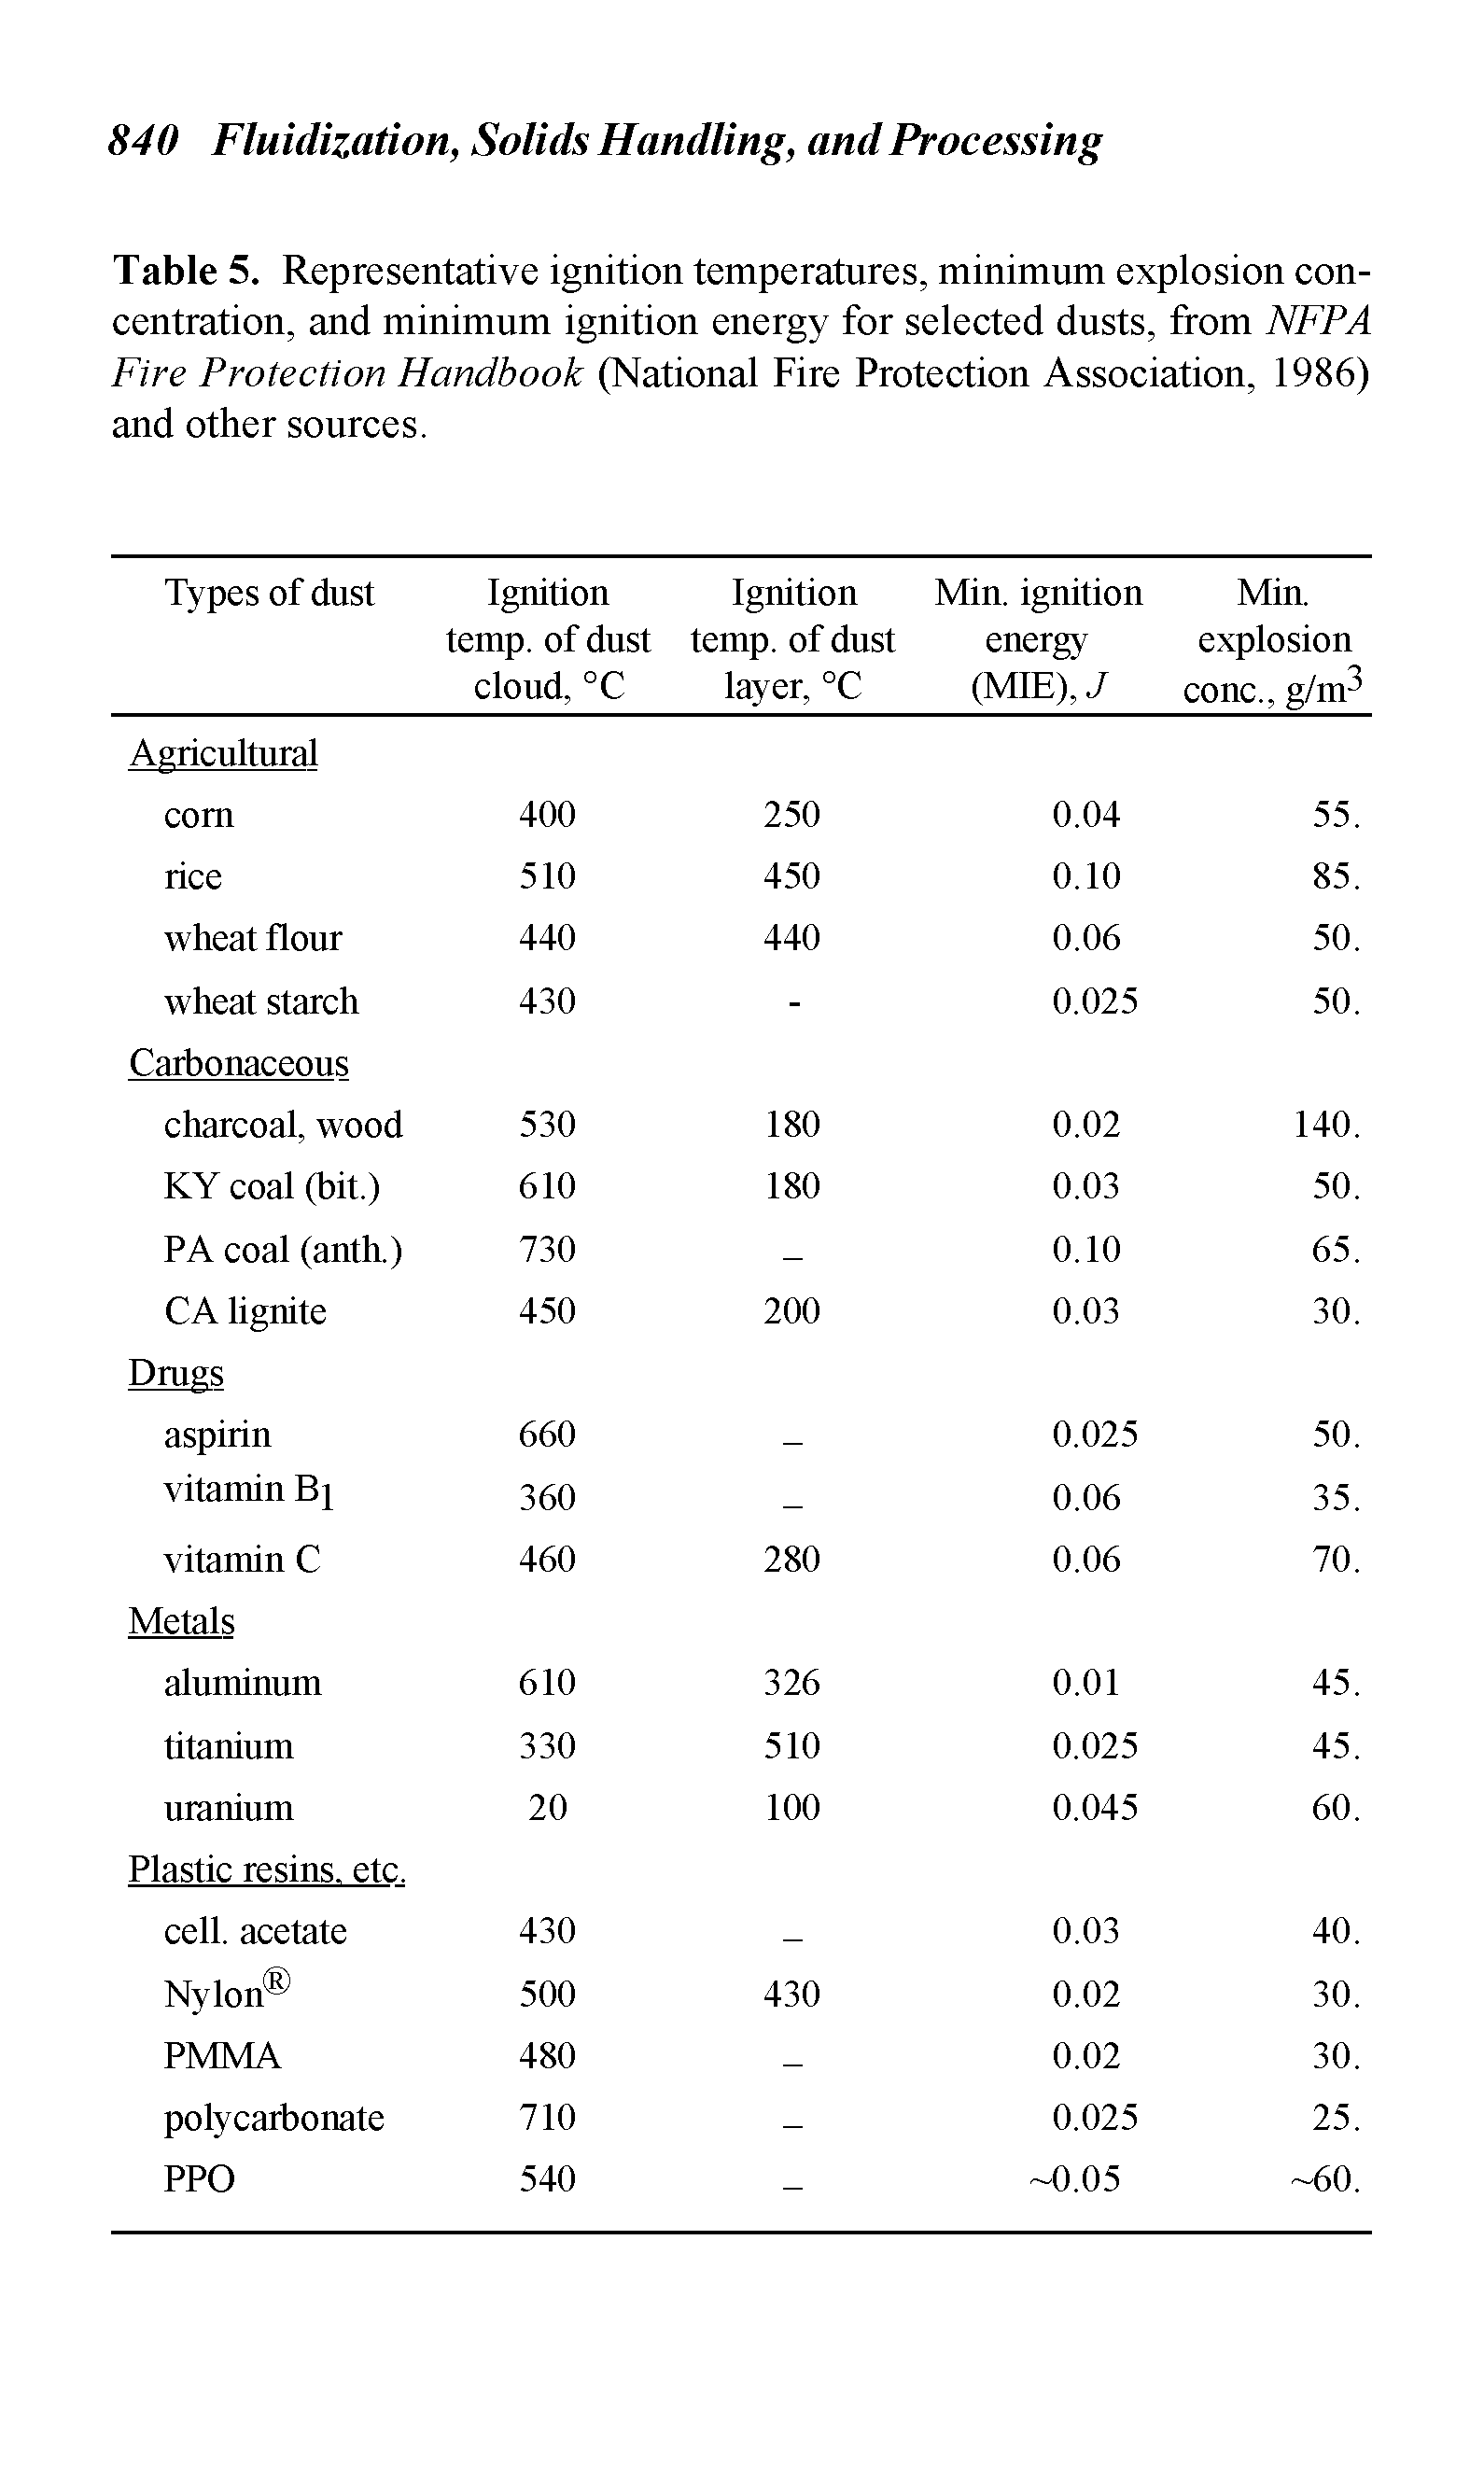 Table 5. Representative ignition temperatures, minimum explosion concentration, and minimum ignition energy for selected dusts, from NFPA Fire Protection Handbook (National Fire Protection Association, 1986) and other sources.